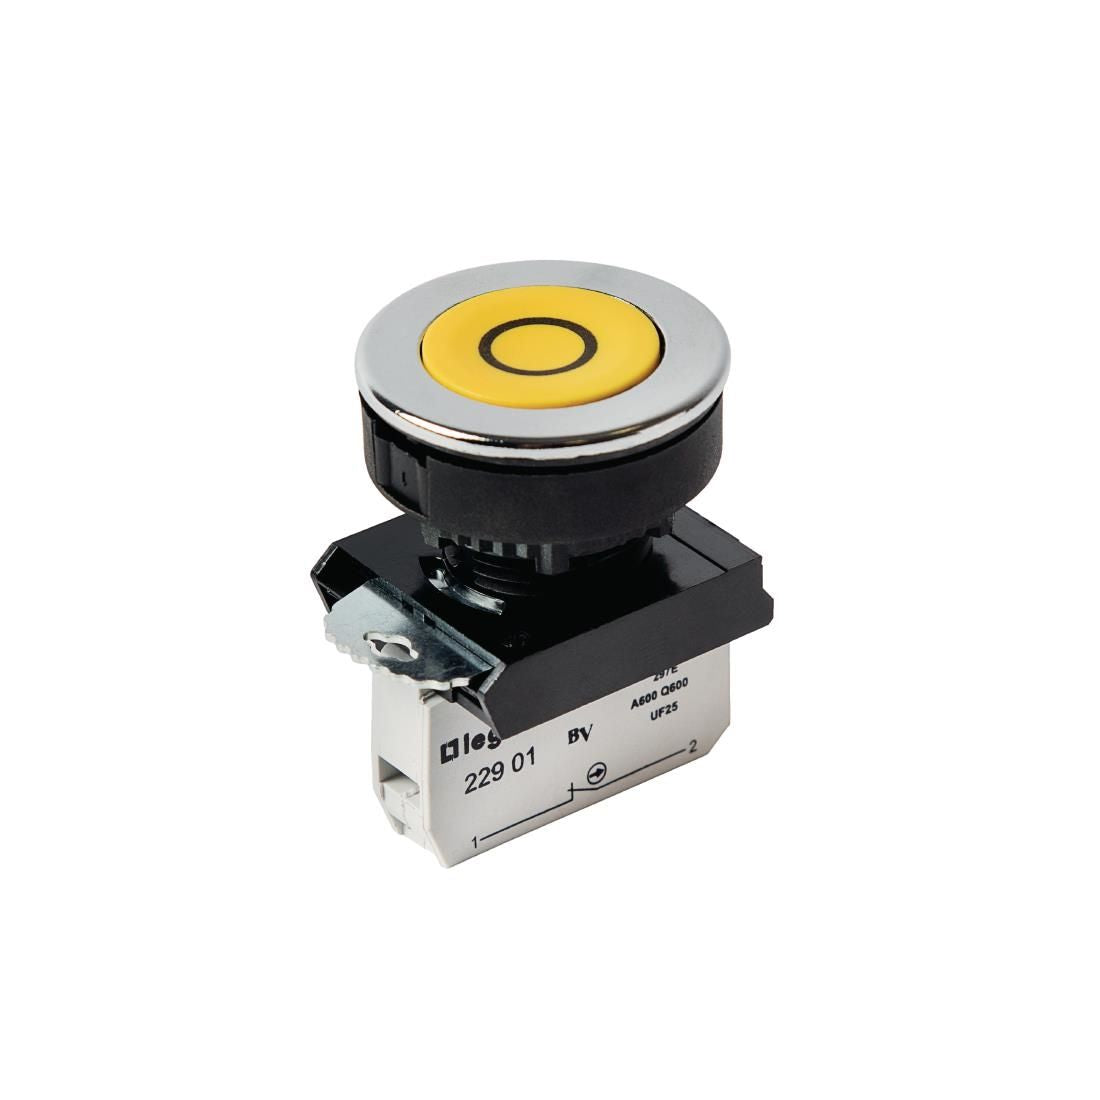 N714 Complete Stop Button